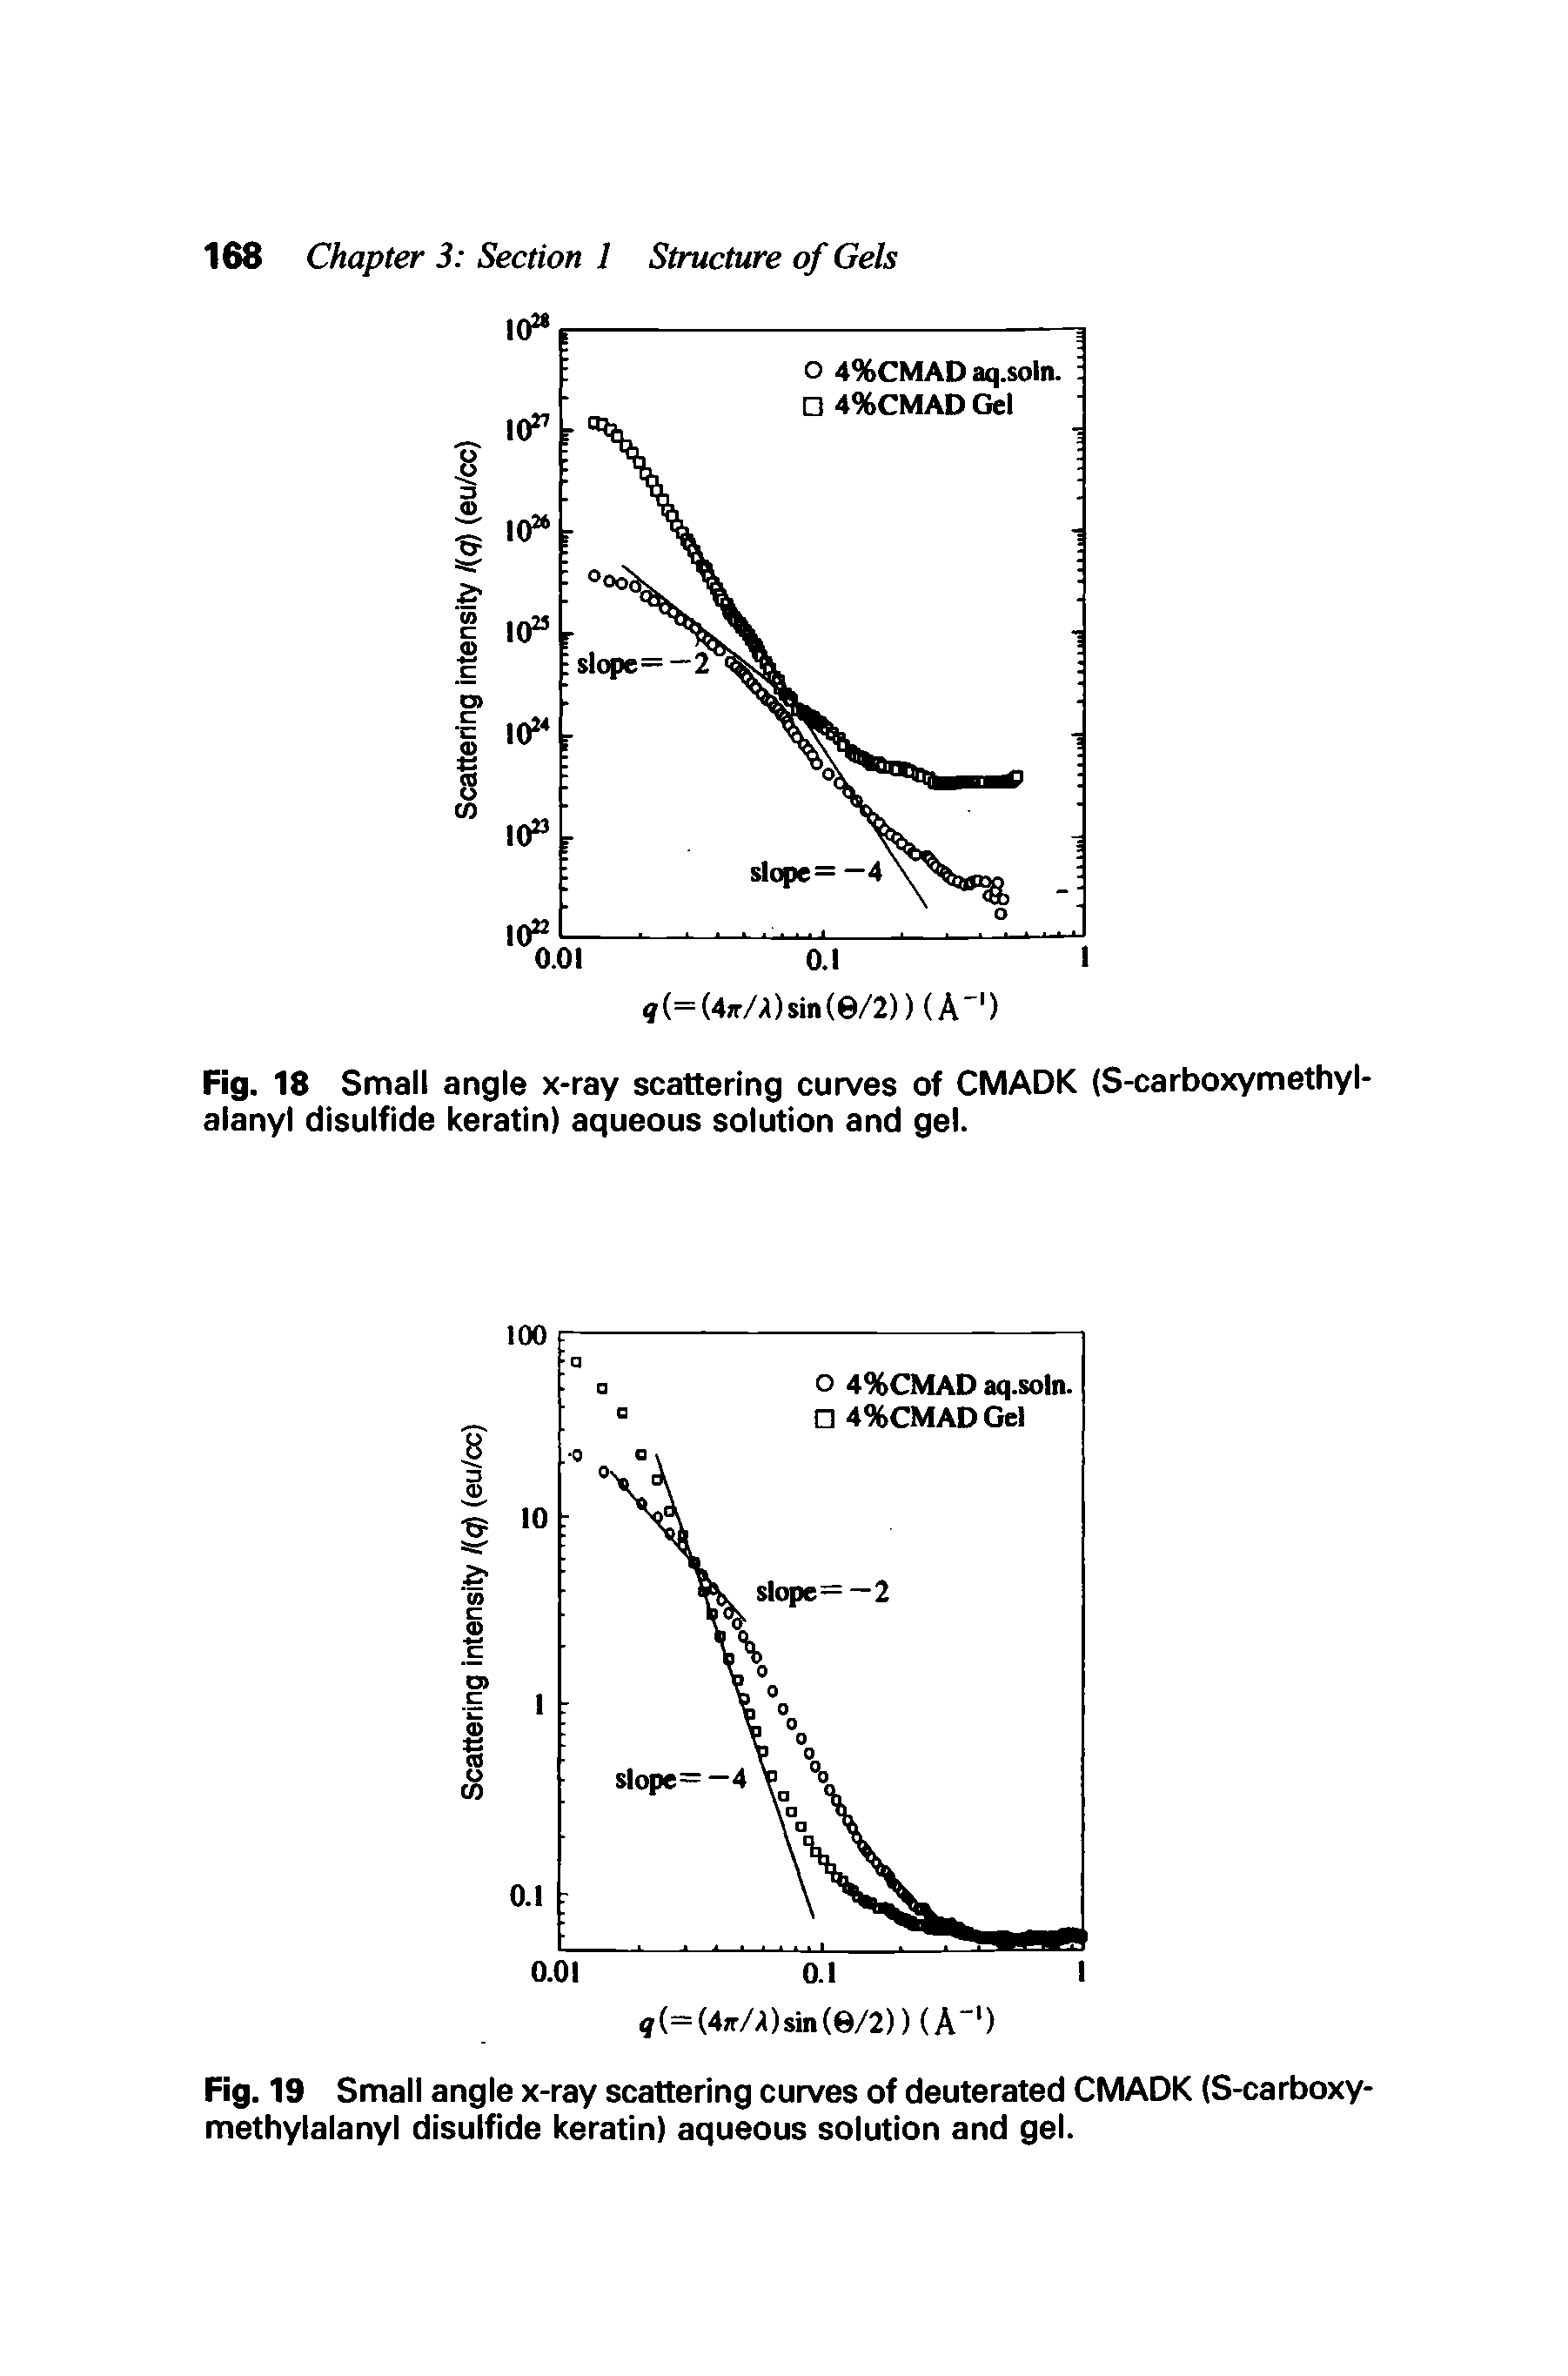 Fig. 18 Small angle x-ray scattering curves of CMADK (S-carboxymethyl-alanyl disulfide keratin) aqueous solution and gel.